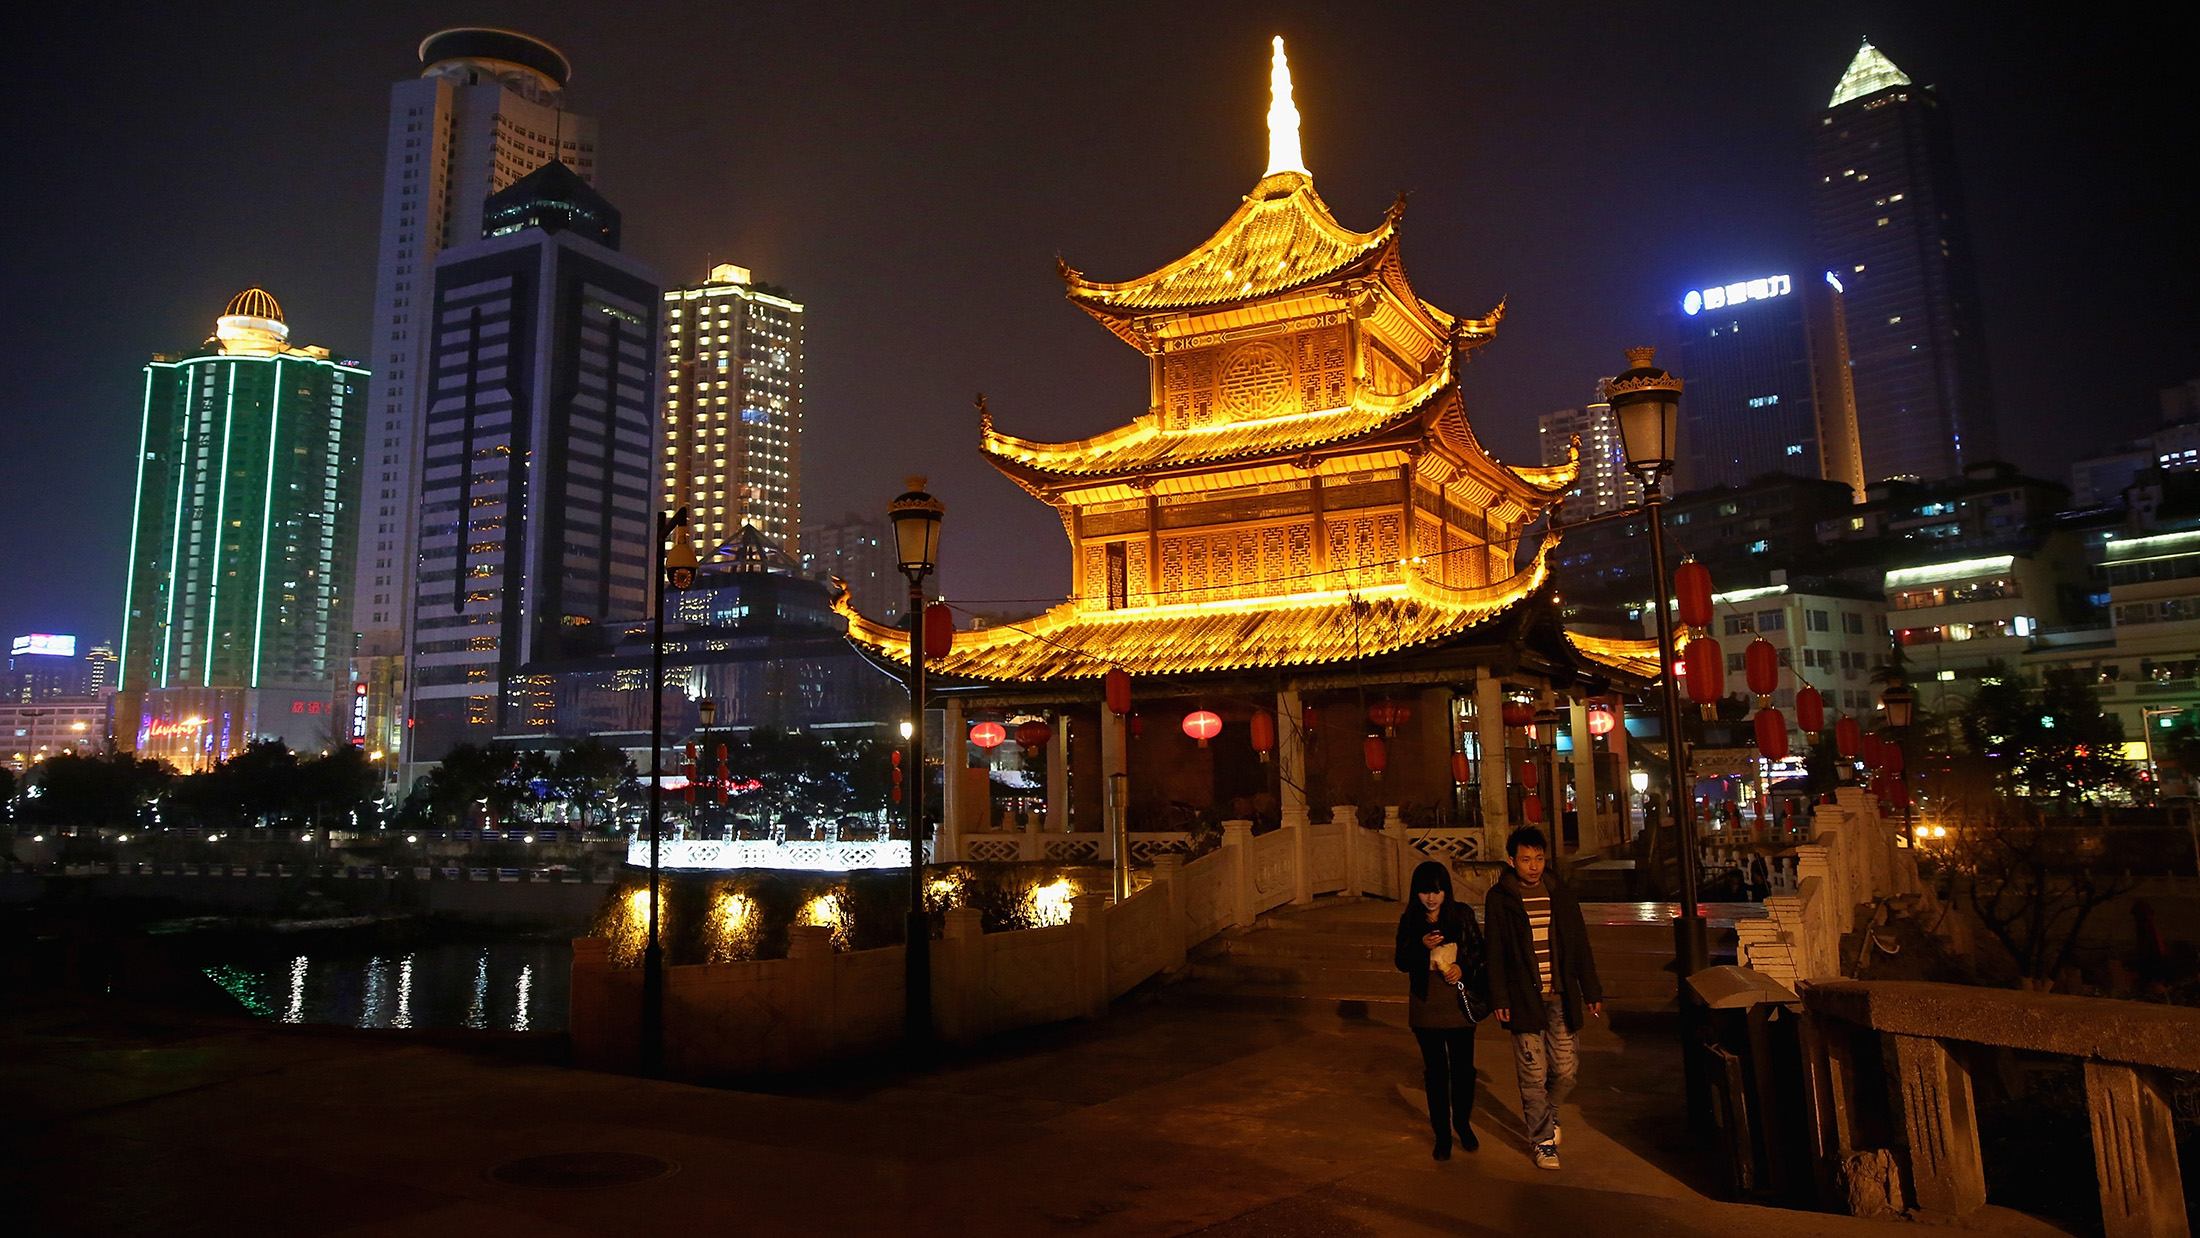 GUIYANG, CHINA - JANUARY 27: The night scene of an array of edifices and the Jiaxiulou Tower, the city's landmark ancient building for sightseeing, on January 27, 2013 in Guiyang of Guizhou Province, China.
